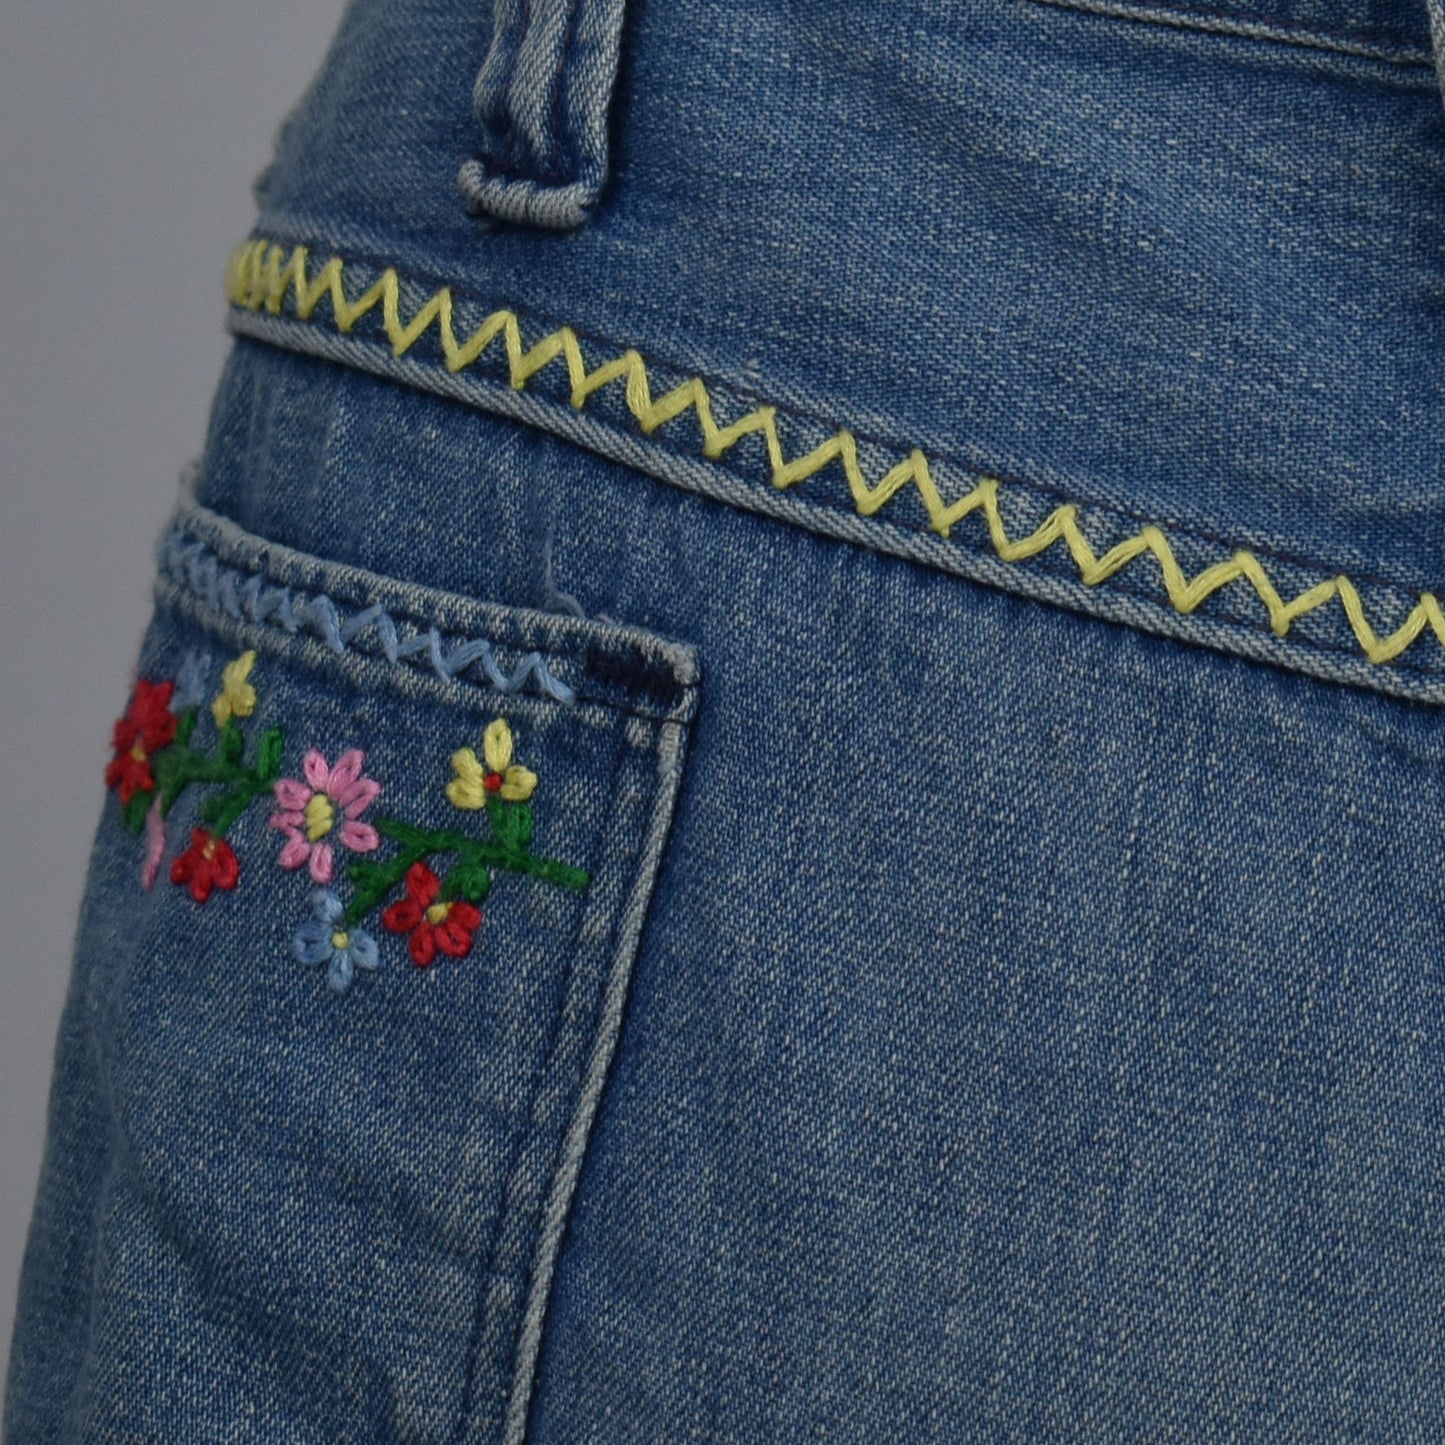 Vintage 60s Wrangler Denim Hand Embroidered Shorts - Made in USA